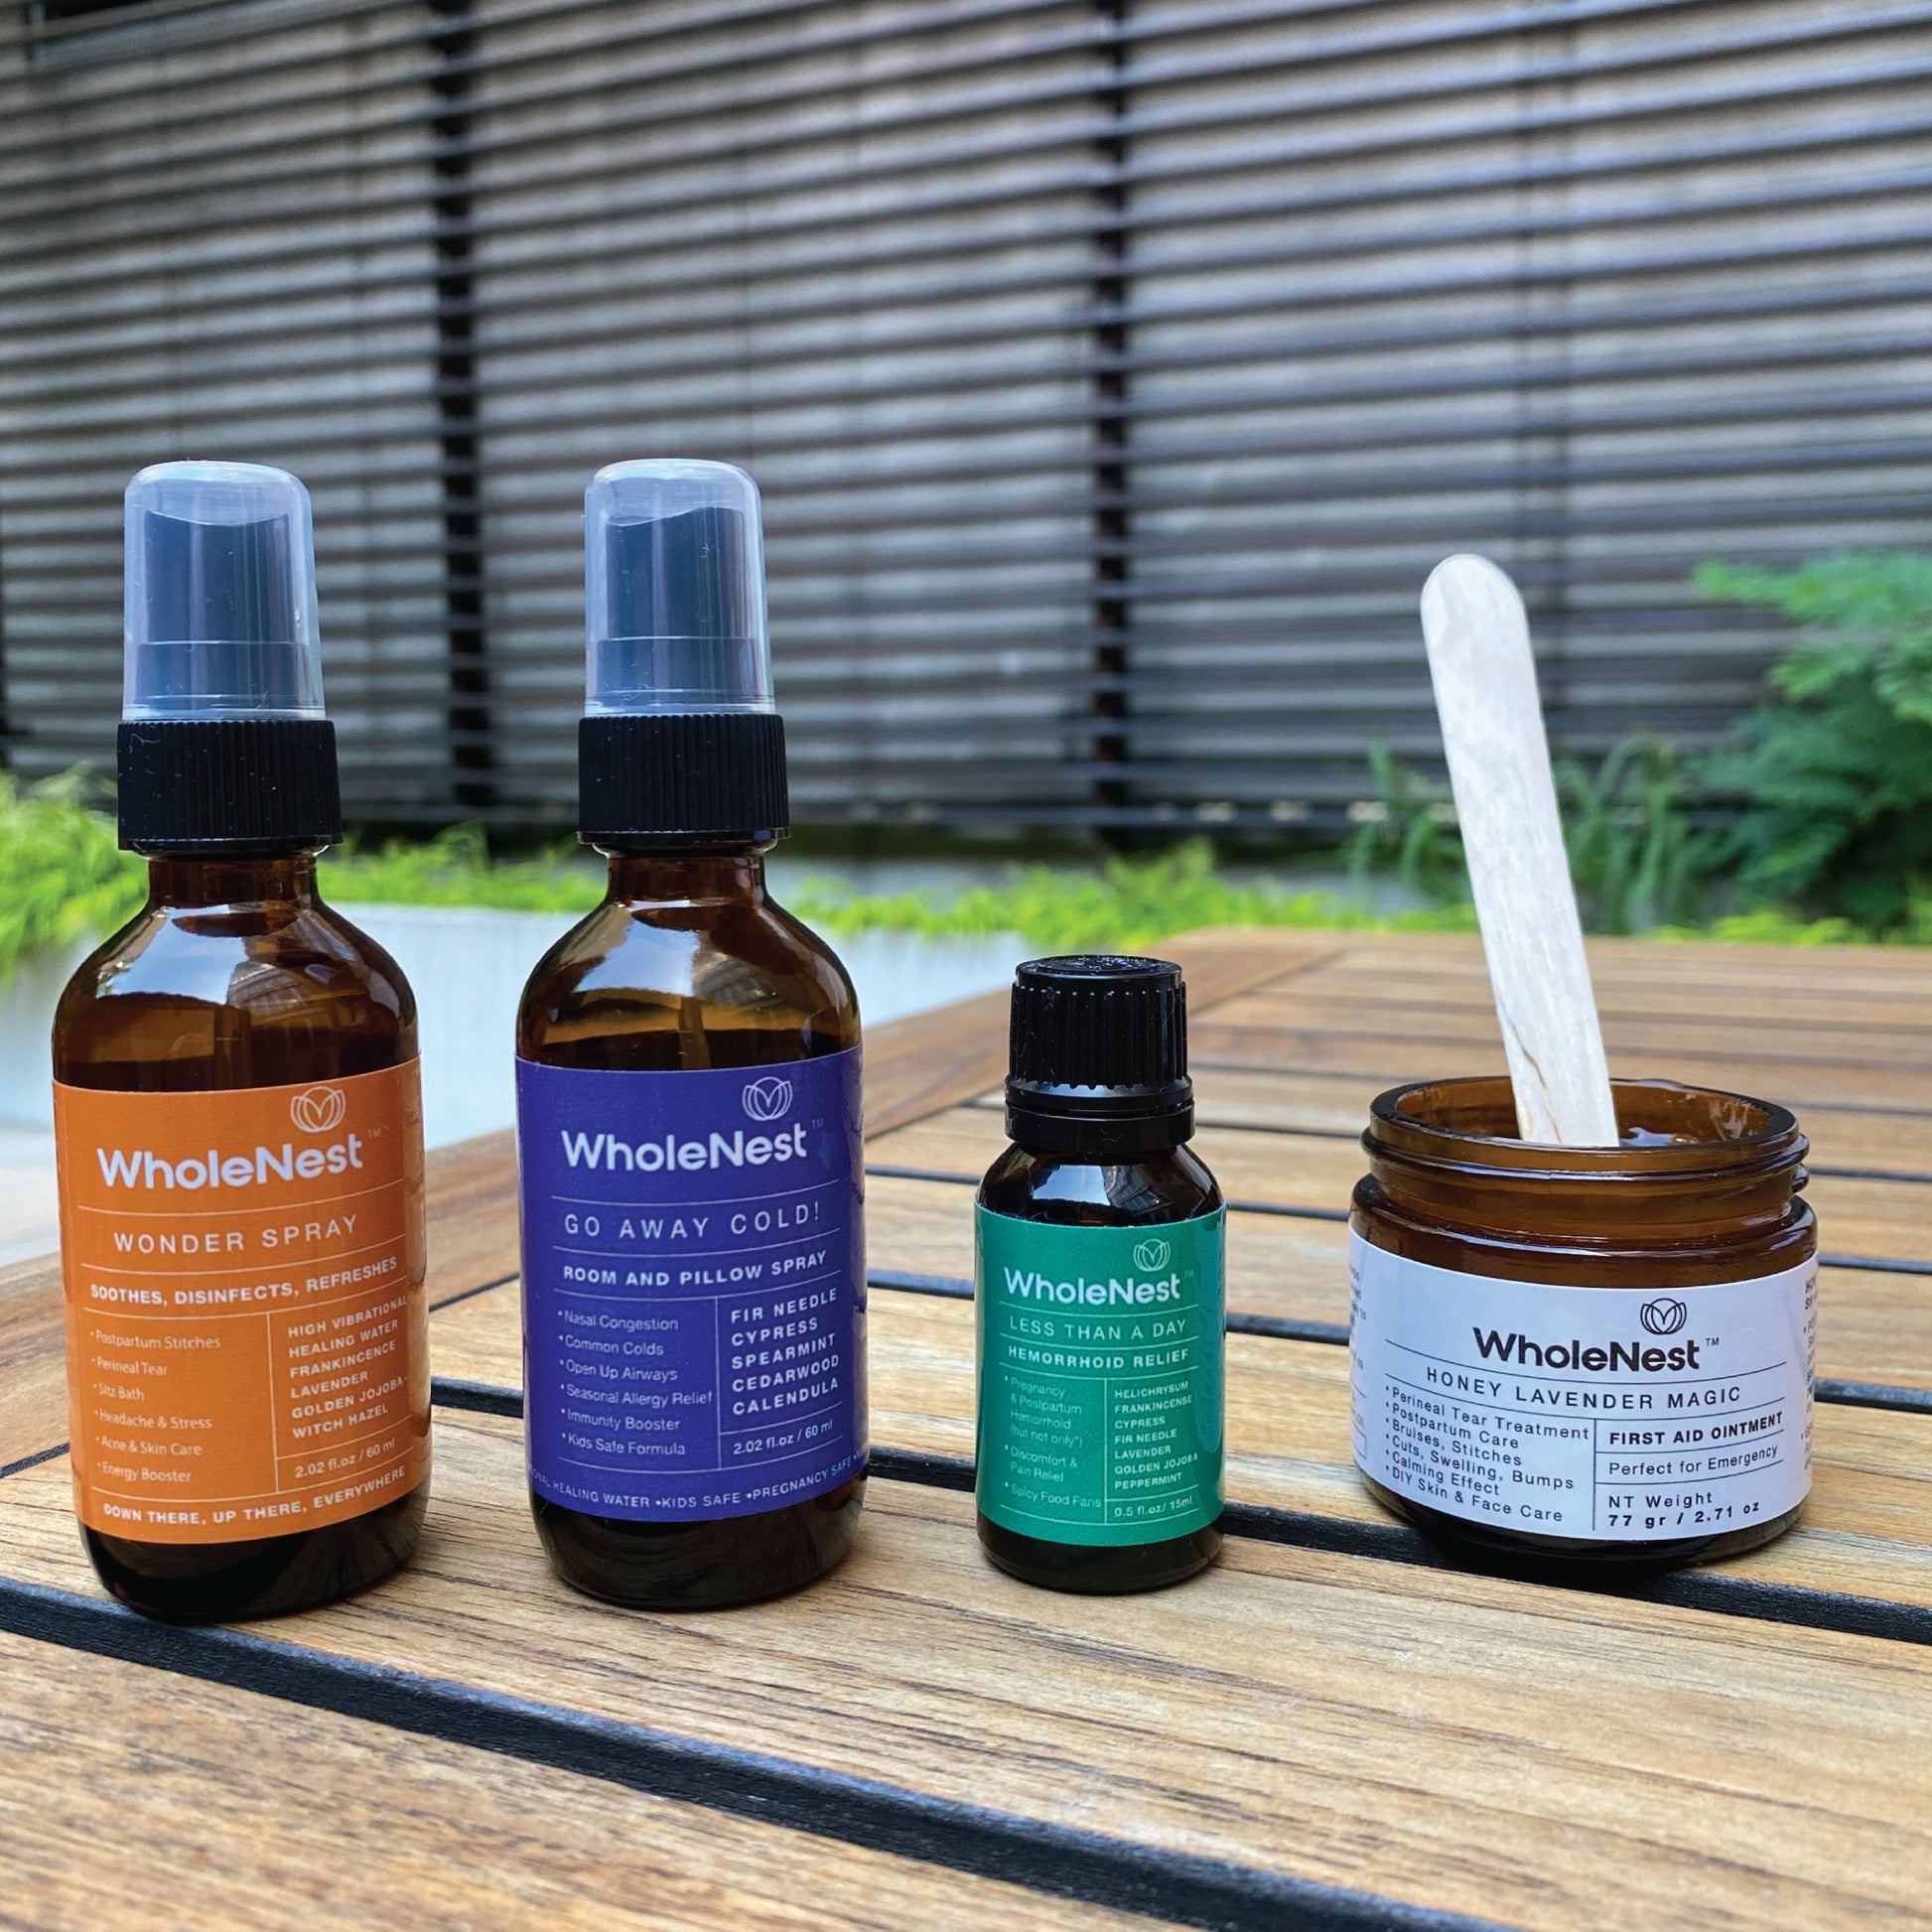 WholeNest is a line of all-natural postpartum products based on the mind-body connection and its natural healing abilities.